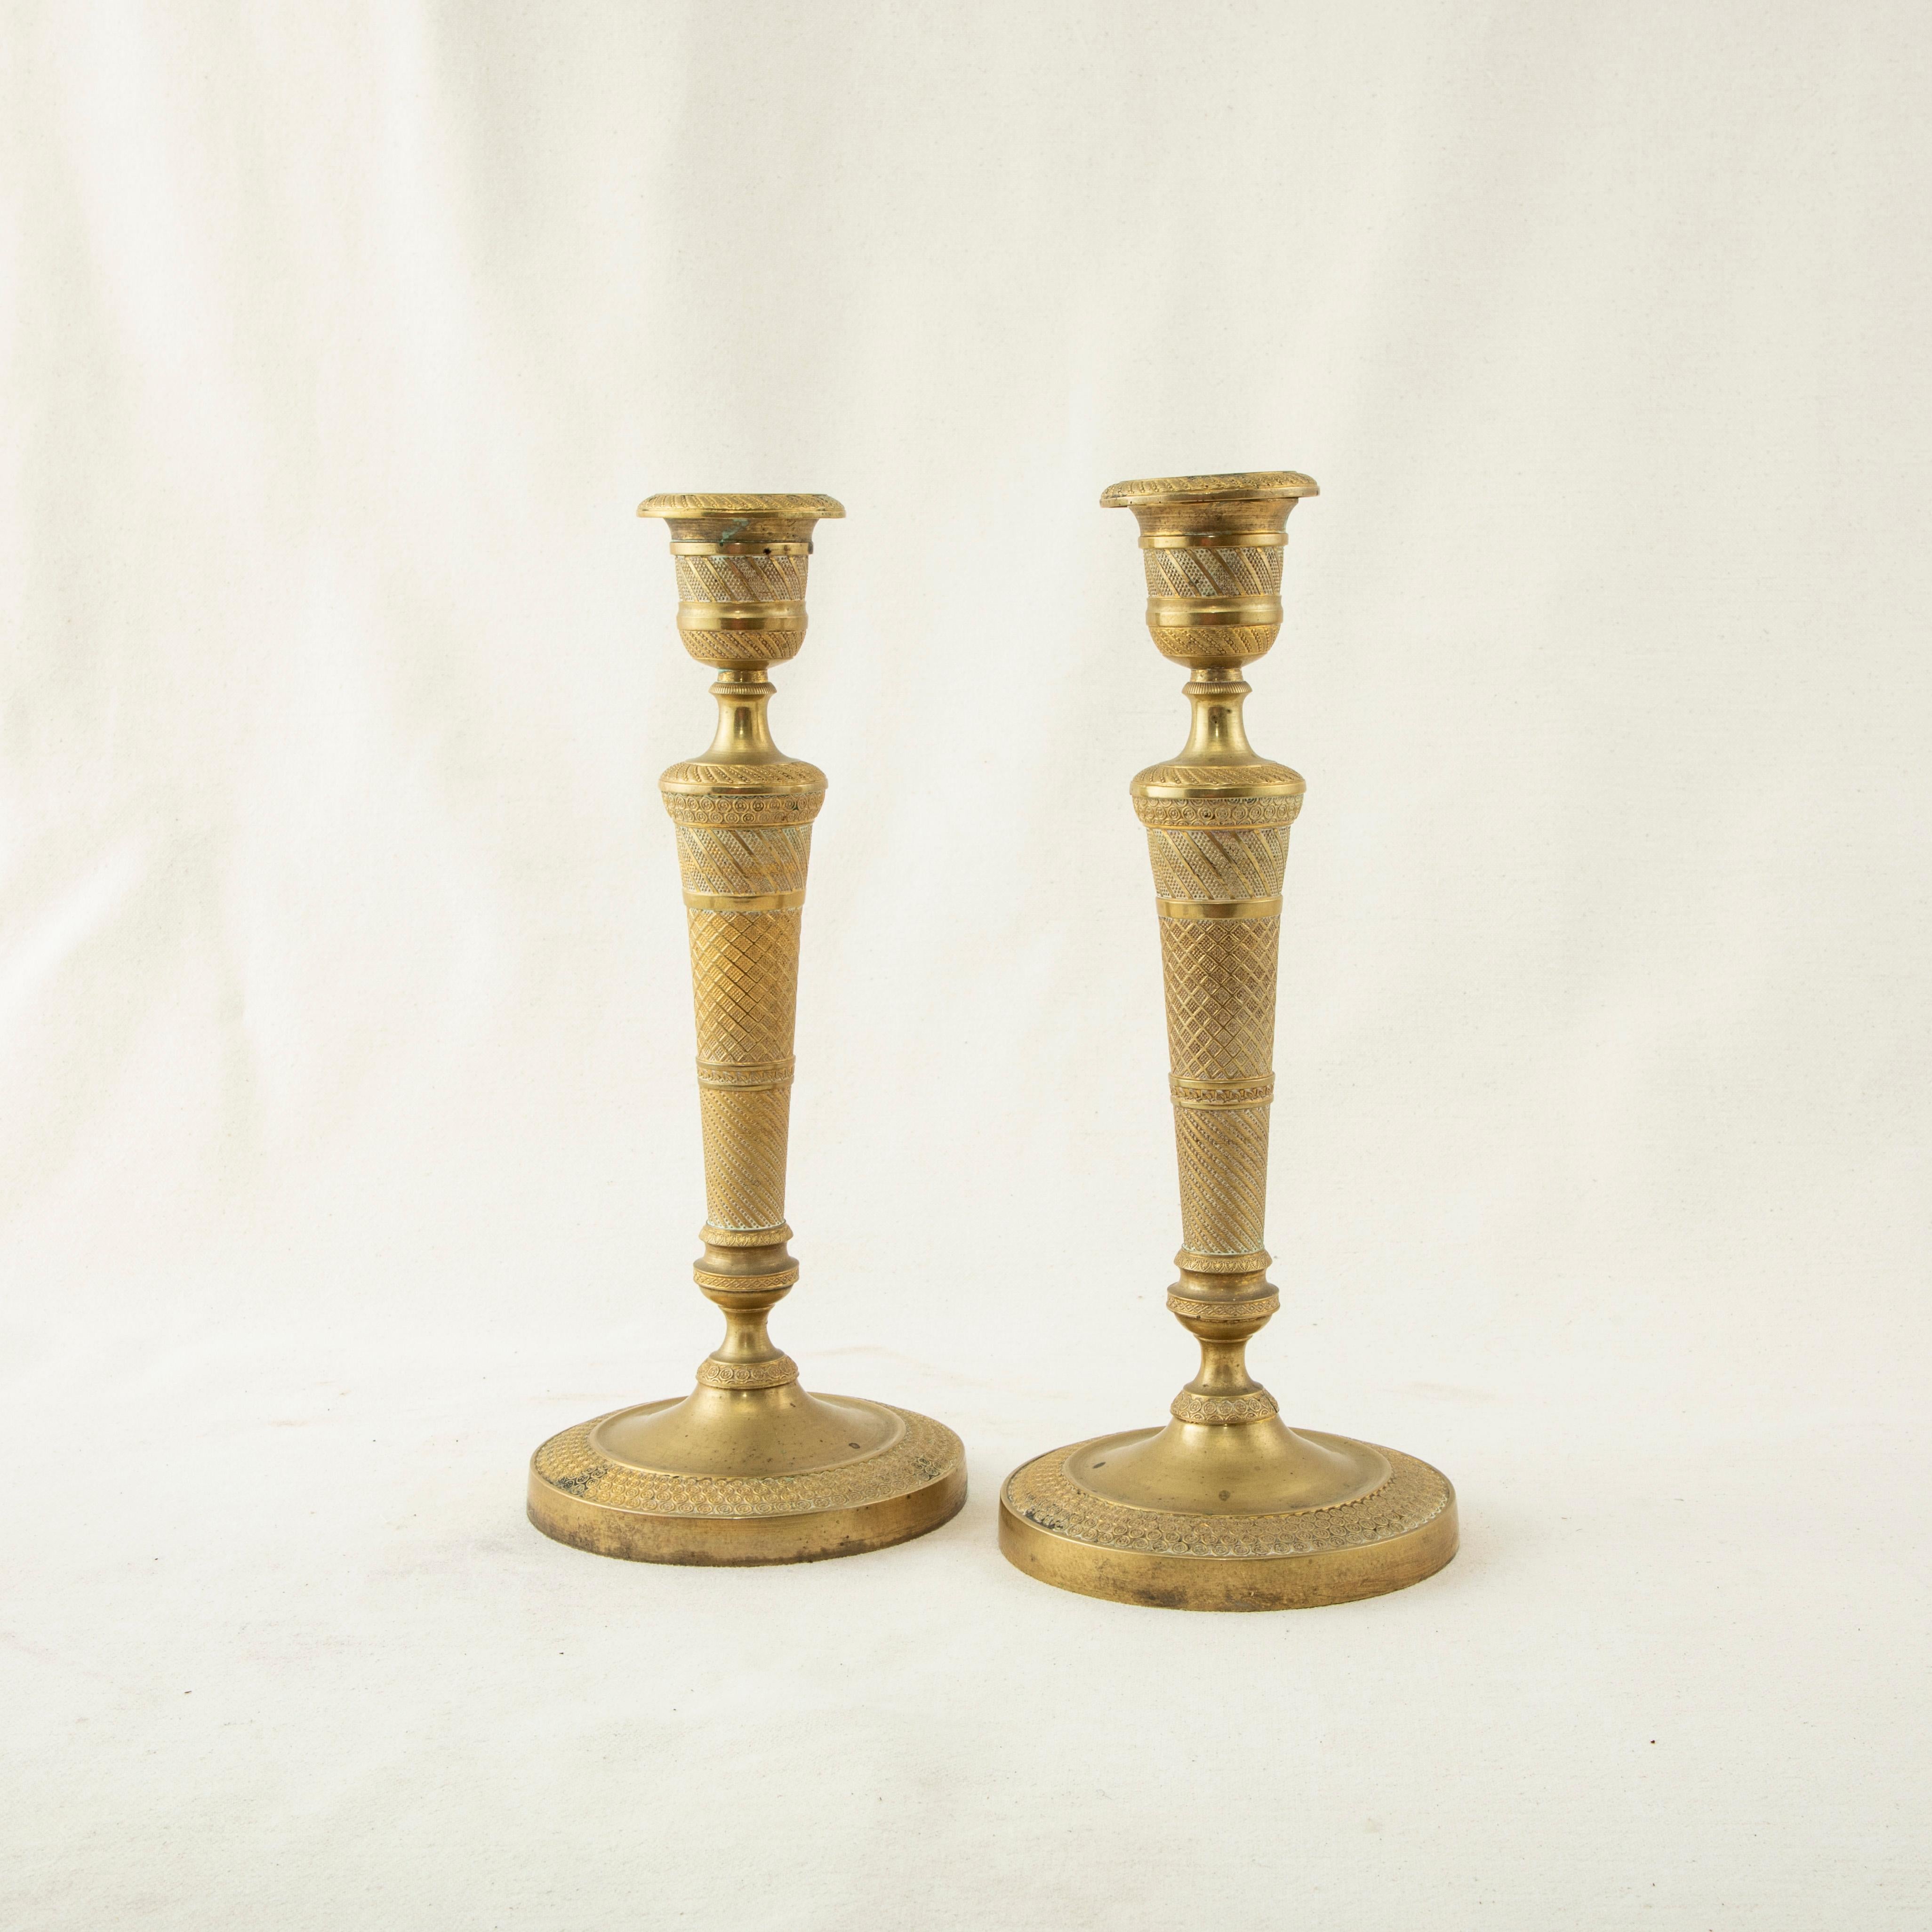 This pair of early nineteenth century French Restauration period bronze candlesticks features a spiral beading motif and concentric circle pattern. Each candlestick measures 10.5 inches tall by 4.5 inches in diameter at the base. The candlesticks